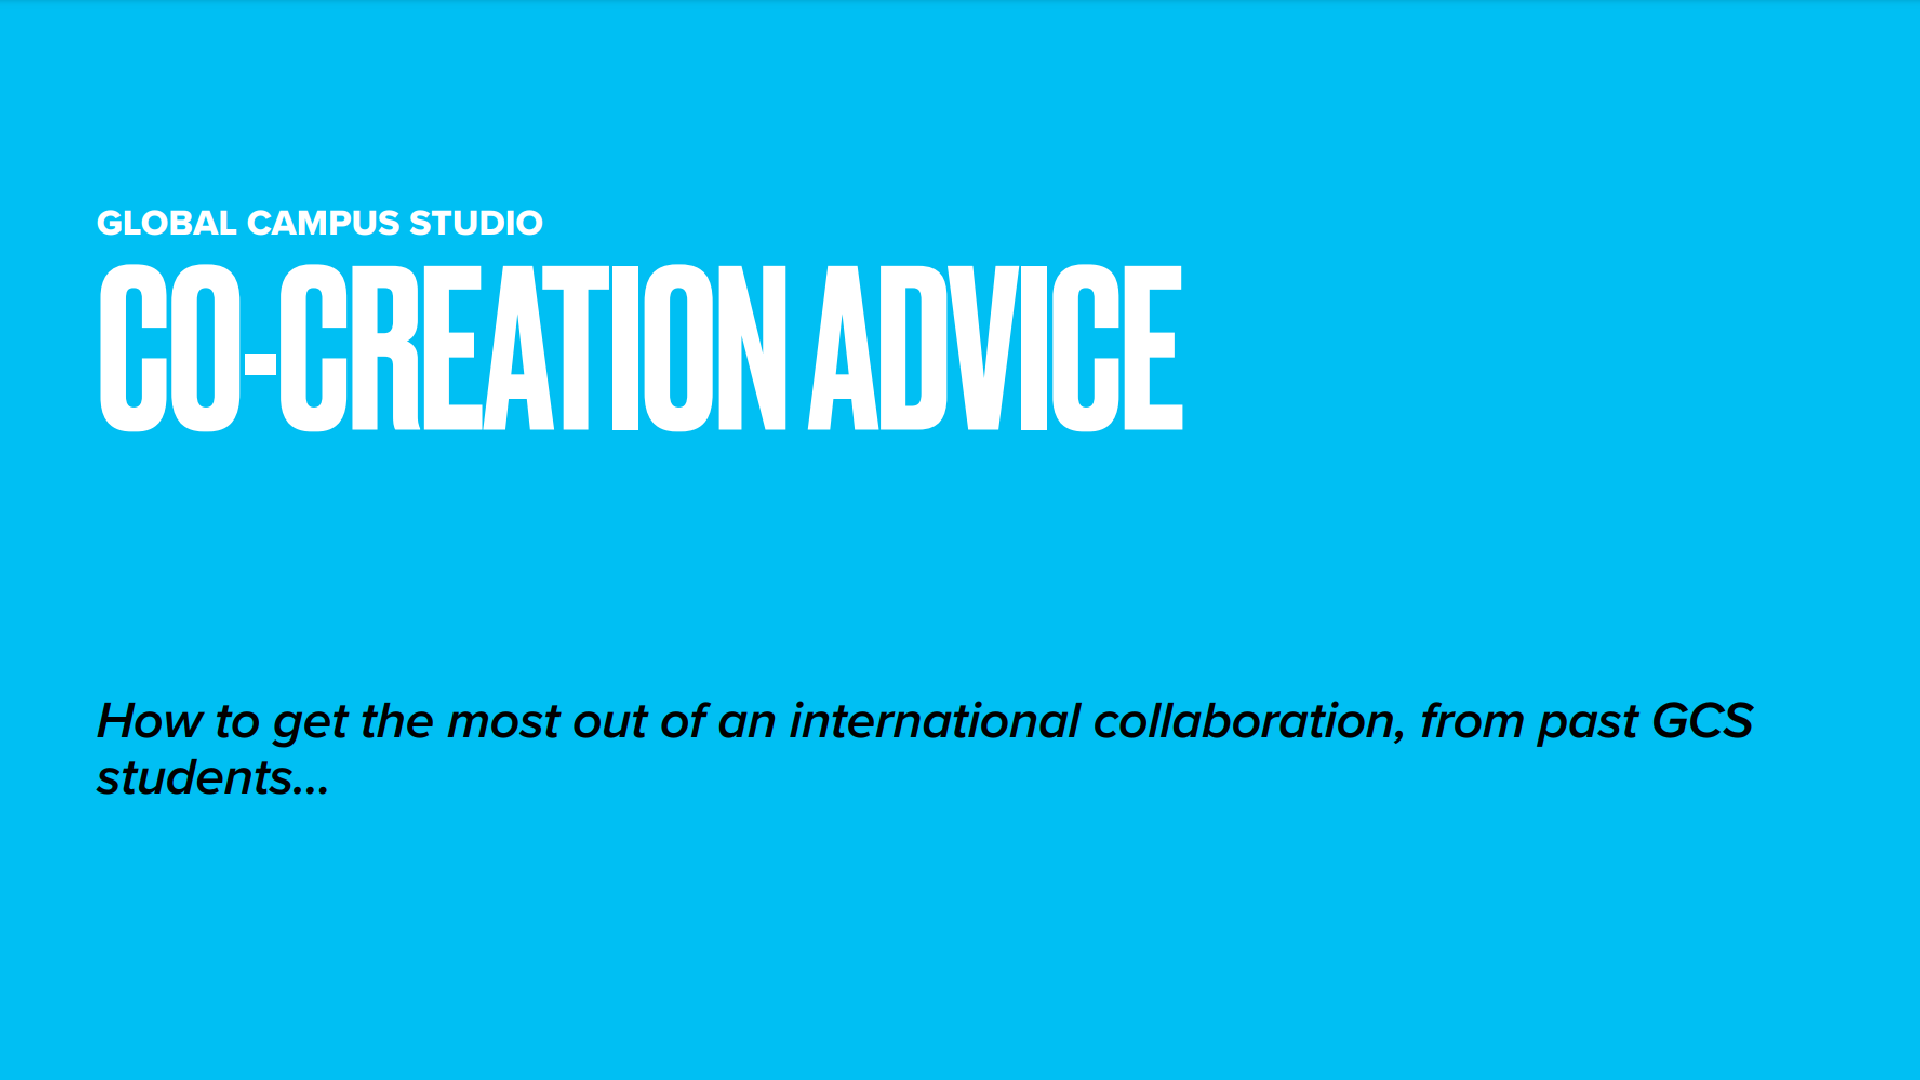 global campus studio co-creation advice how to get the most out of an international collaboration, from past GCS students... in white and black text on a light blue background